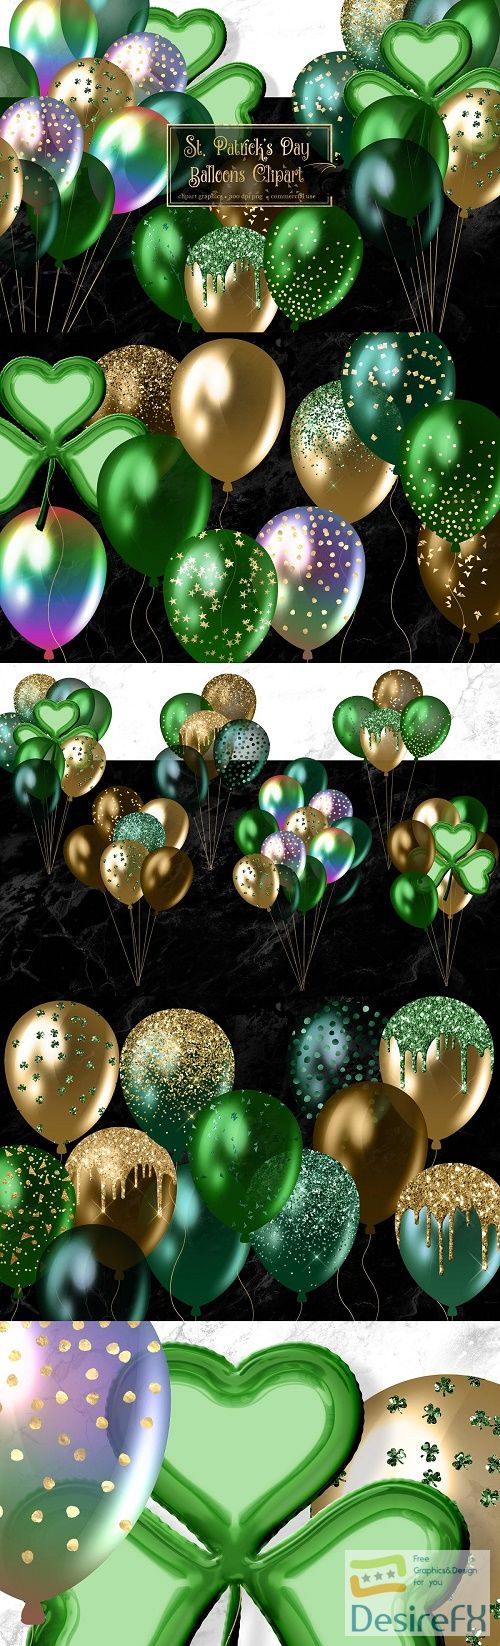 St Patrick's Day Balloons Clipart - 4459798